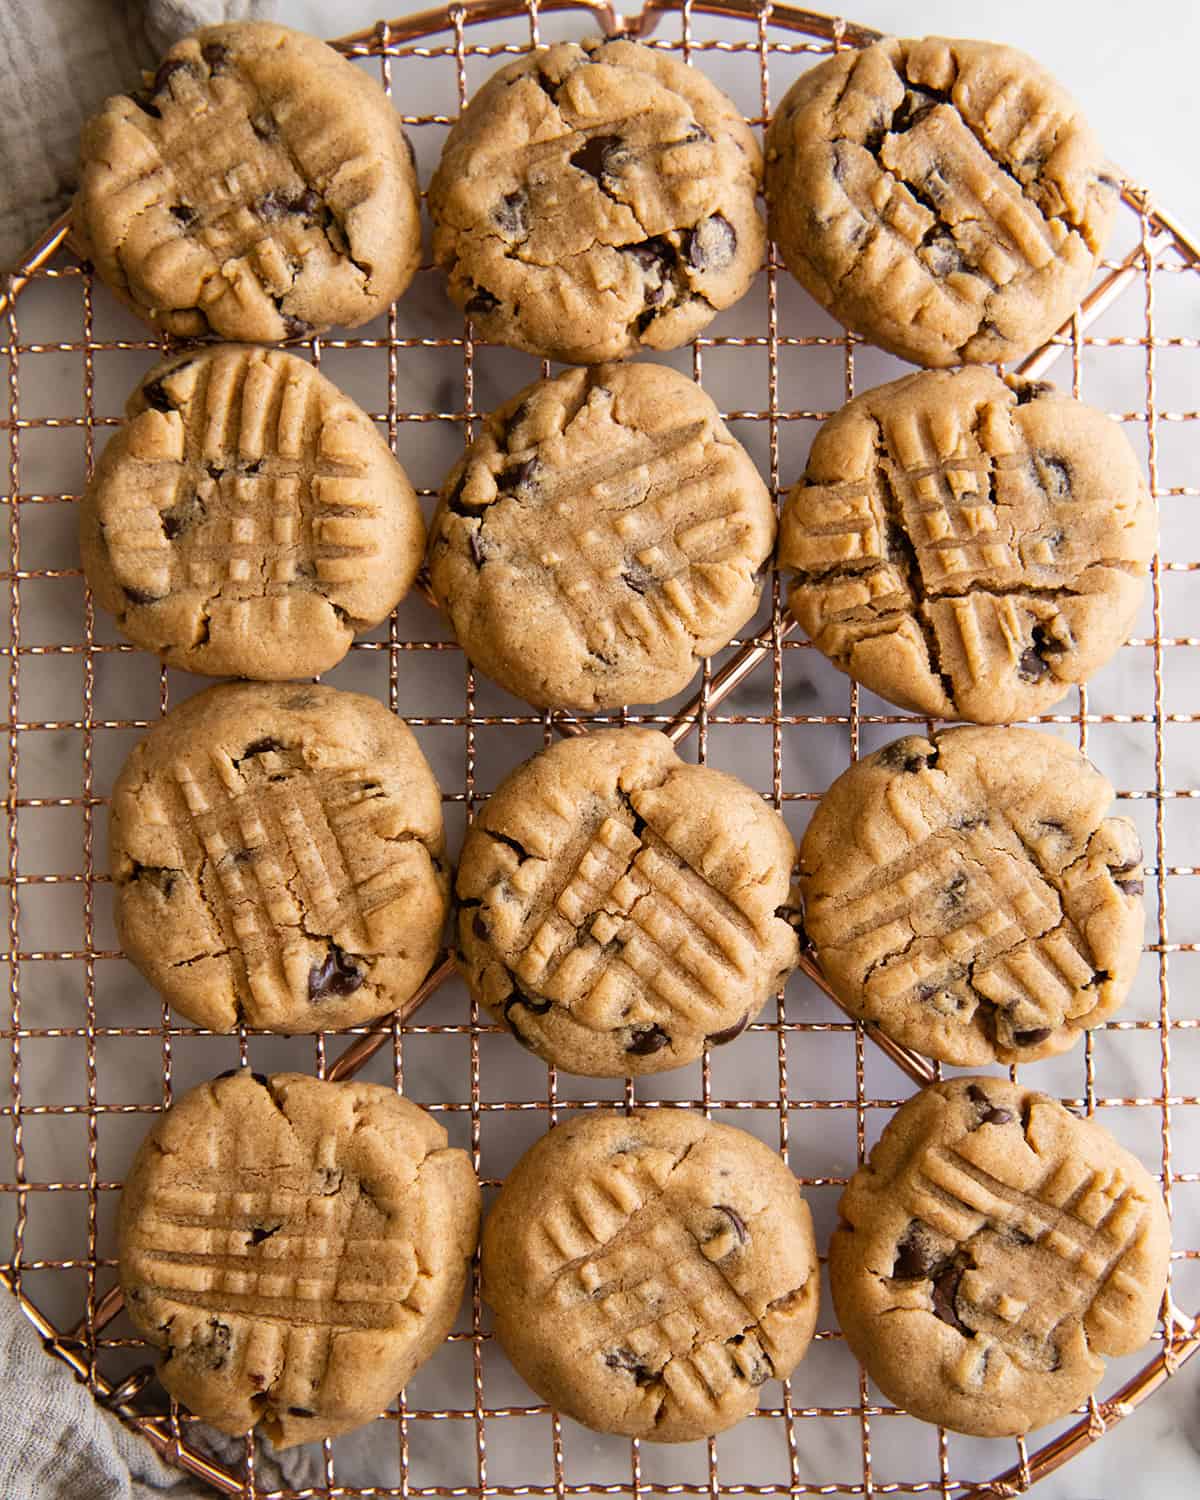 12 Peanut Butter Chocolate Chip Cookies on a wire cooling rack